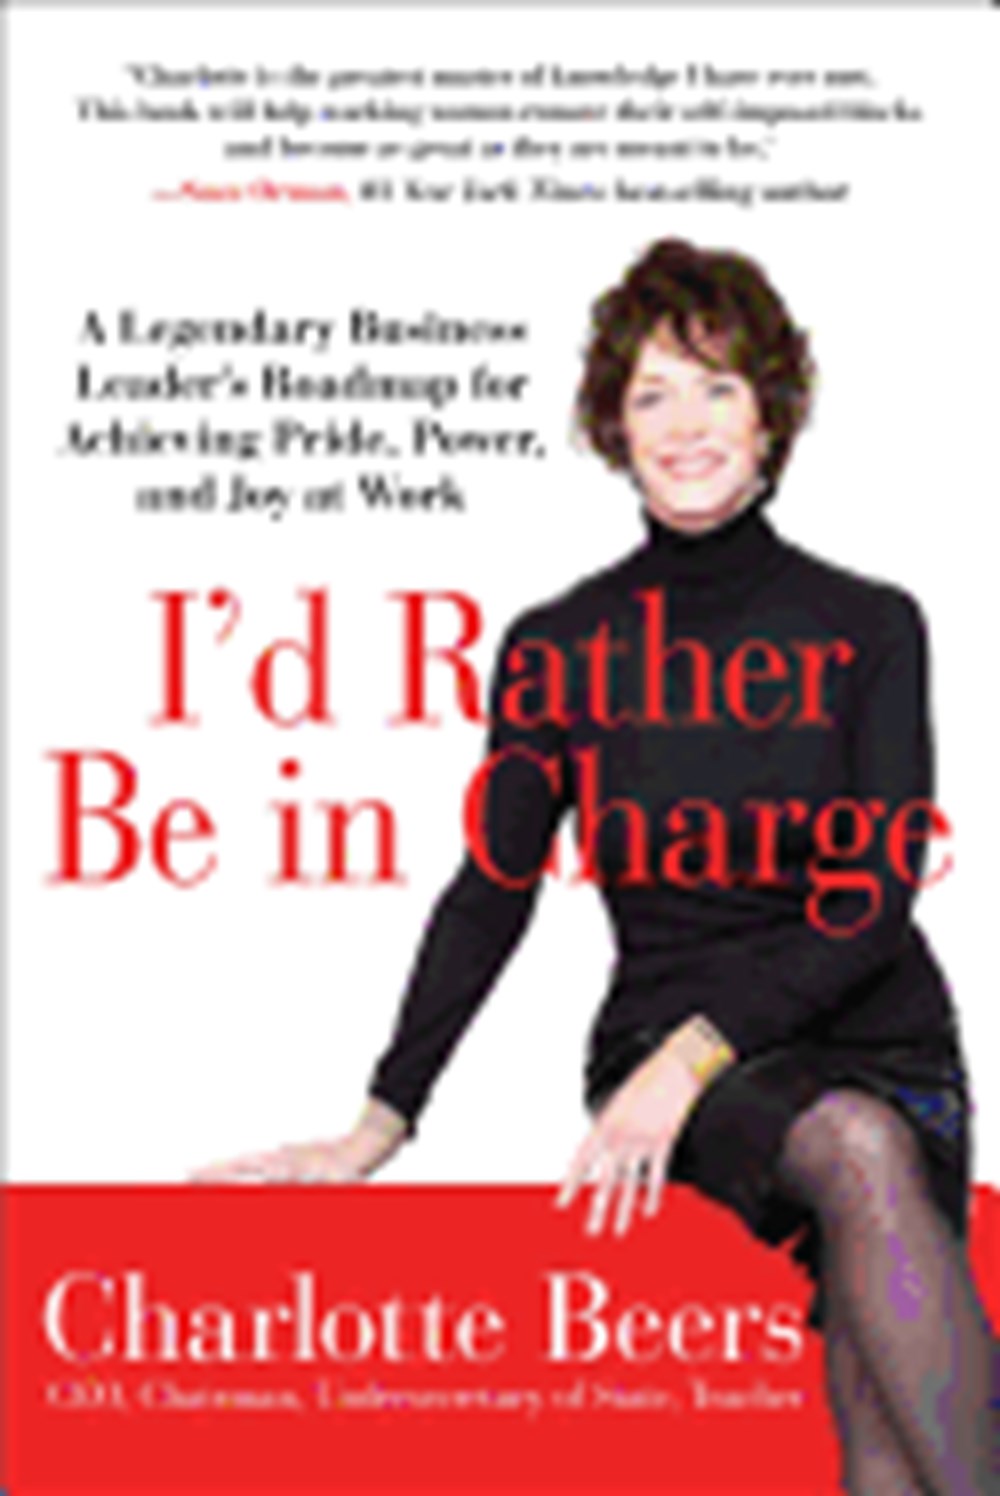 I'd Rather Be in Charge A Legendary Business Leader's Roadmap for Achieving Pride, Power, and Joy at